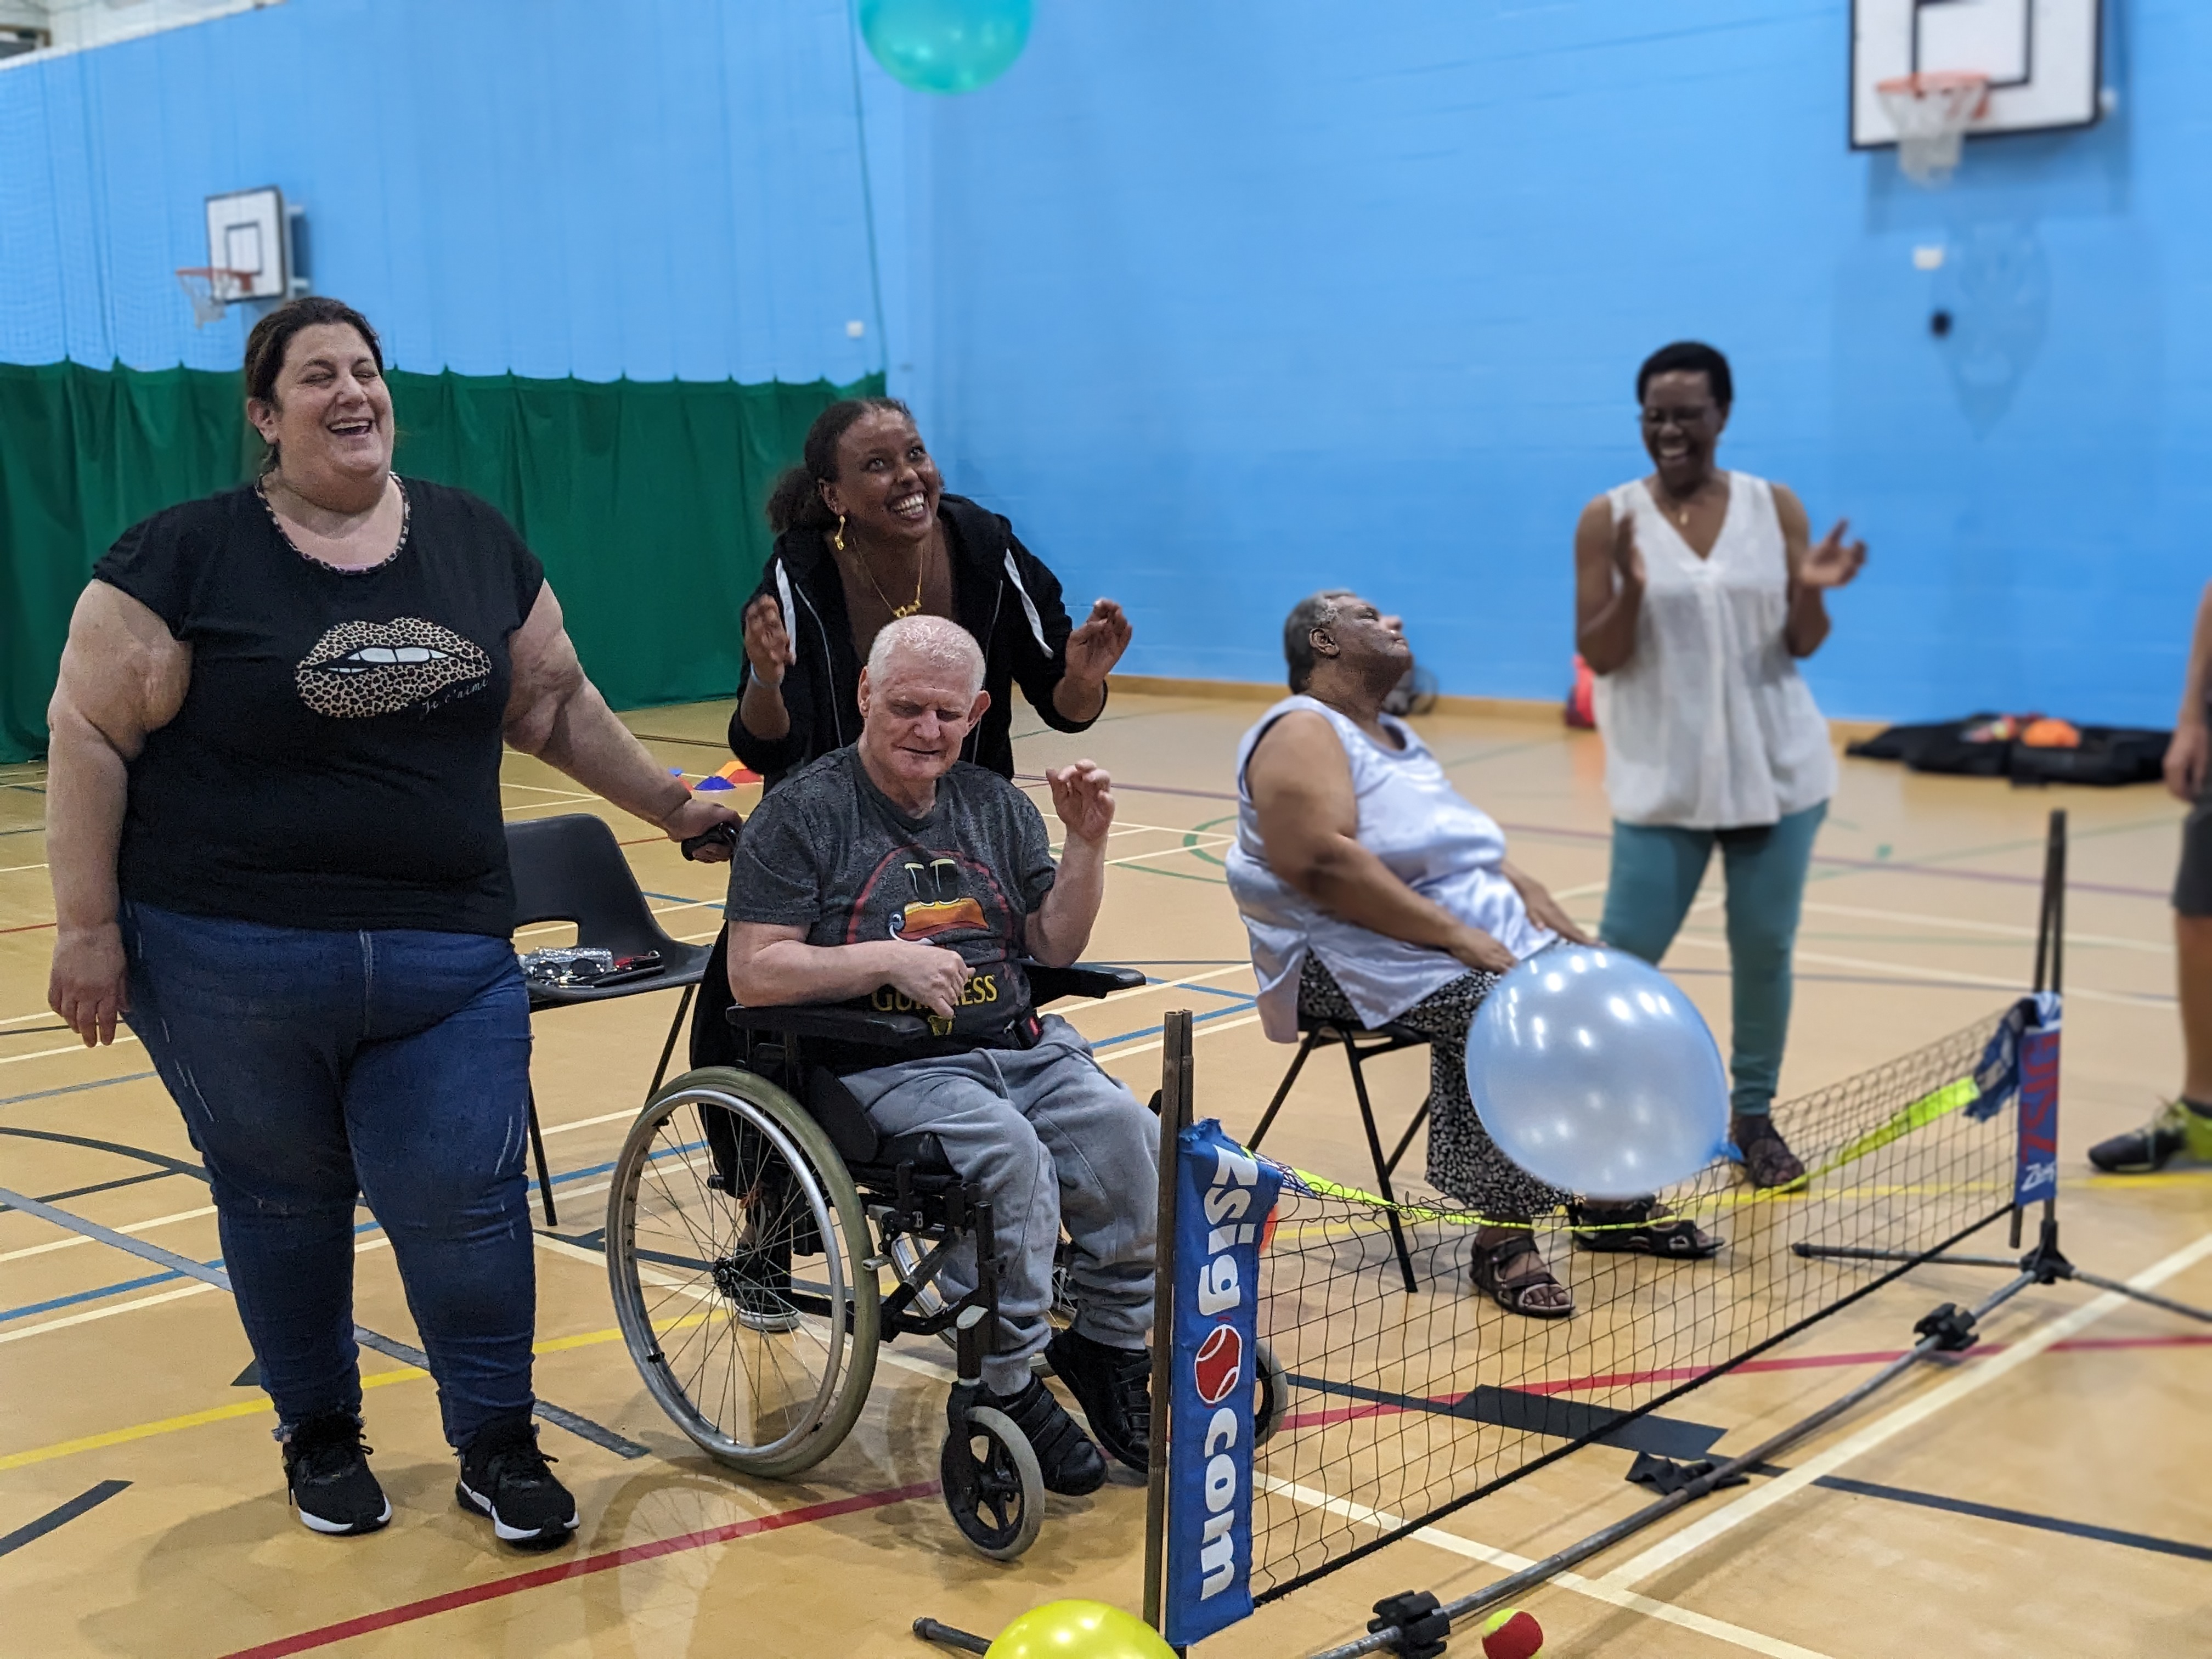 Players at a sensory tennis session in Barnet play with a balloon 